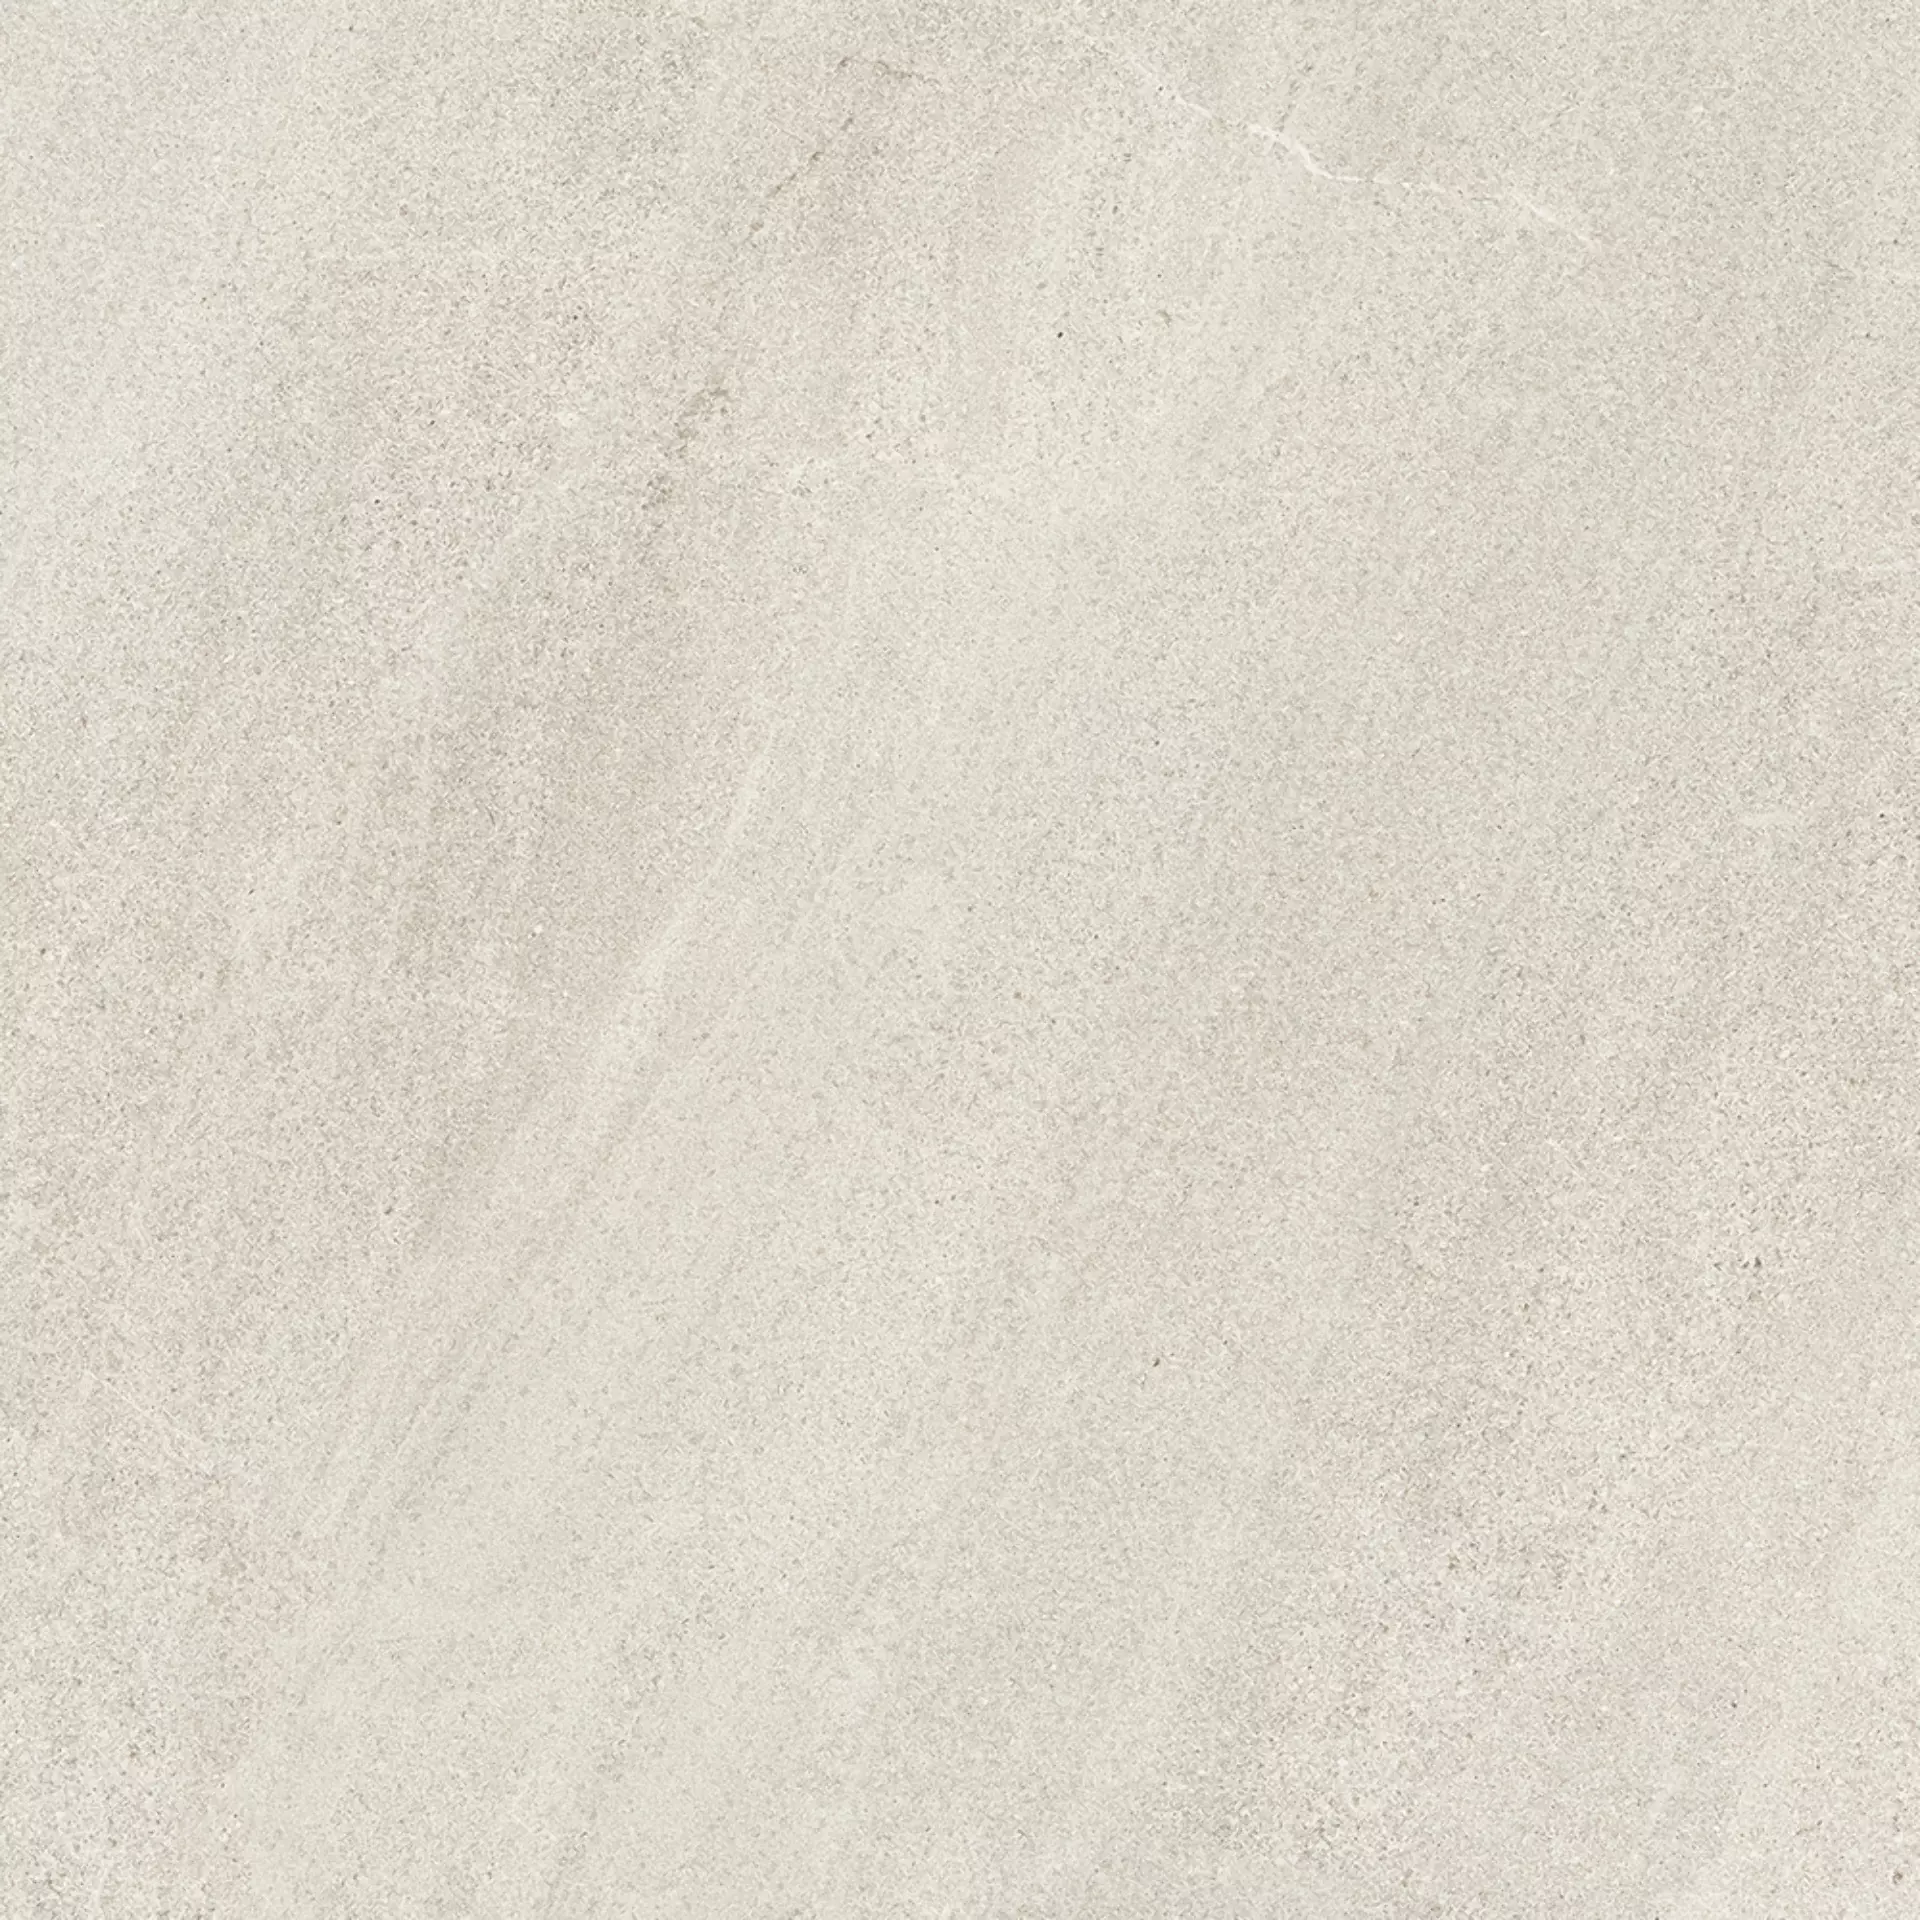 Cottodeste Limestone Clay Naturale Protect EGWLS11 60x60cm rectified 14mm